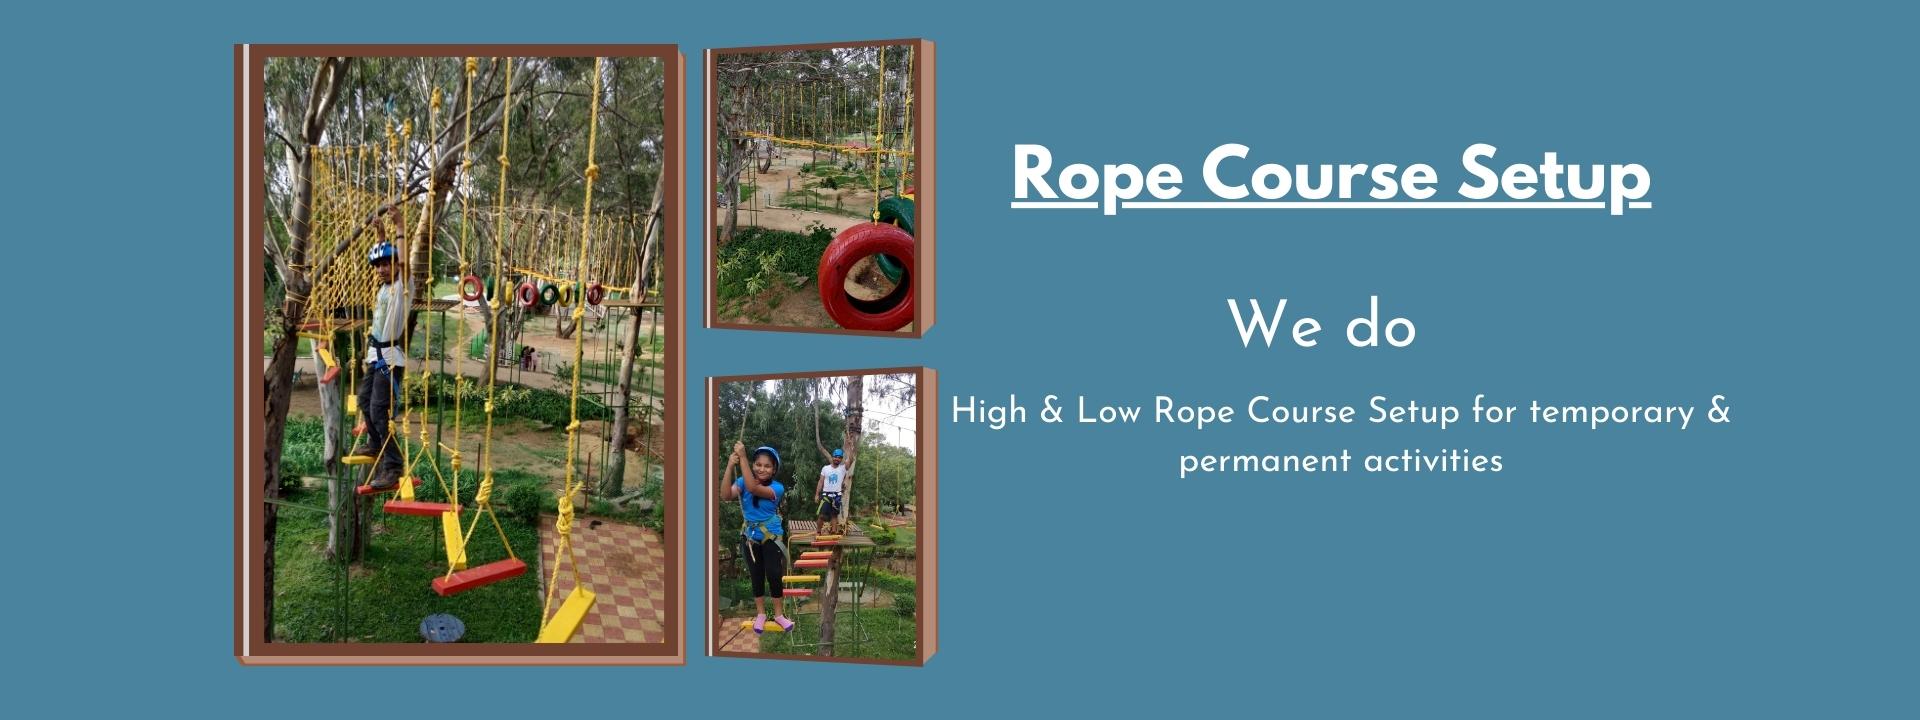 Rope course Setup | Low & High Rope Course